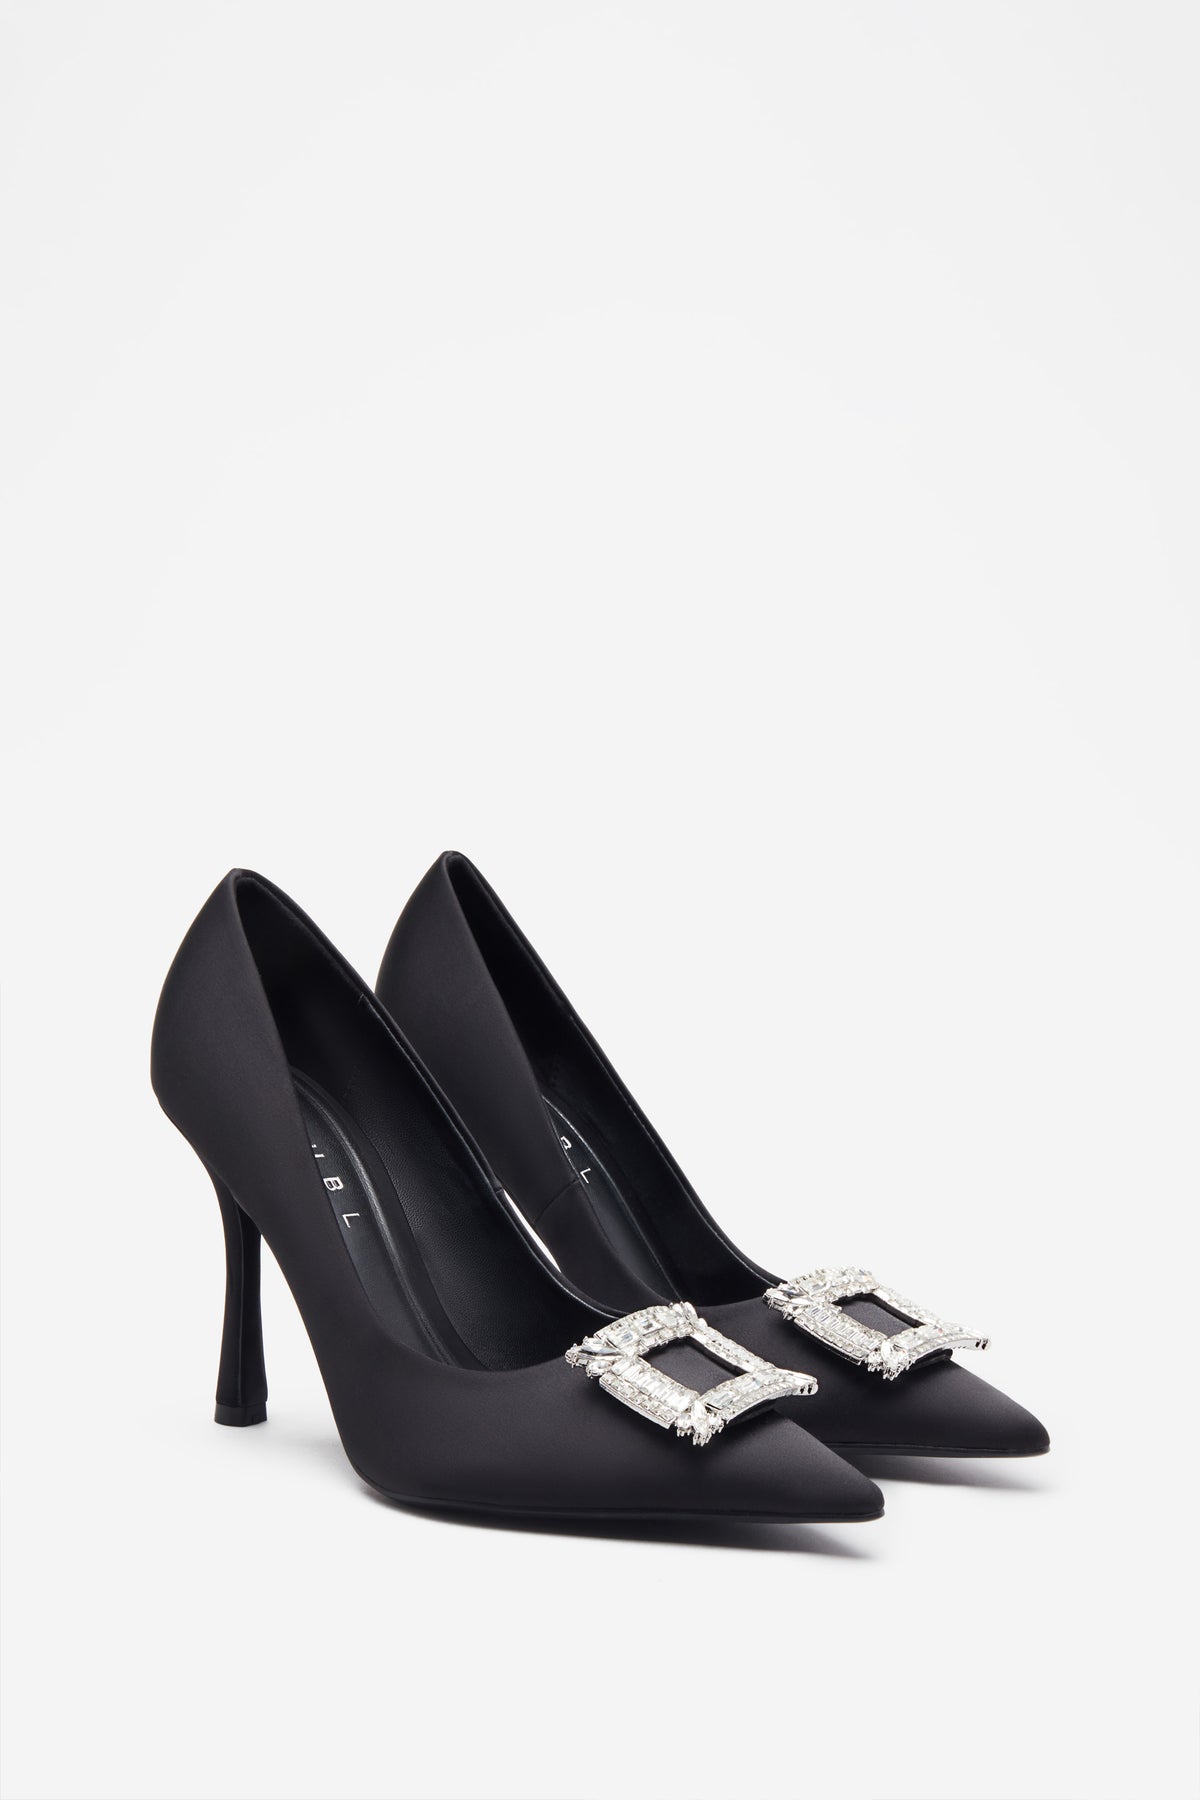 Lawless Black Satin Pointed Court Heels With Diamante Brooches – Club L ...